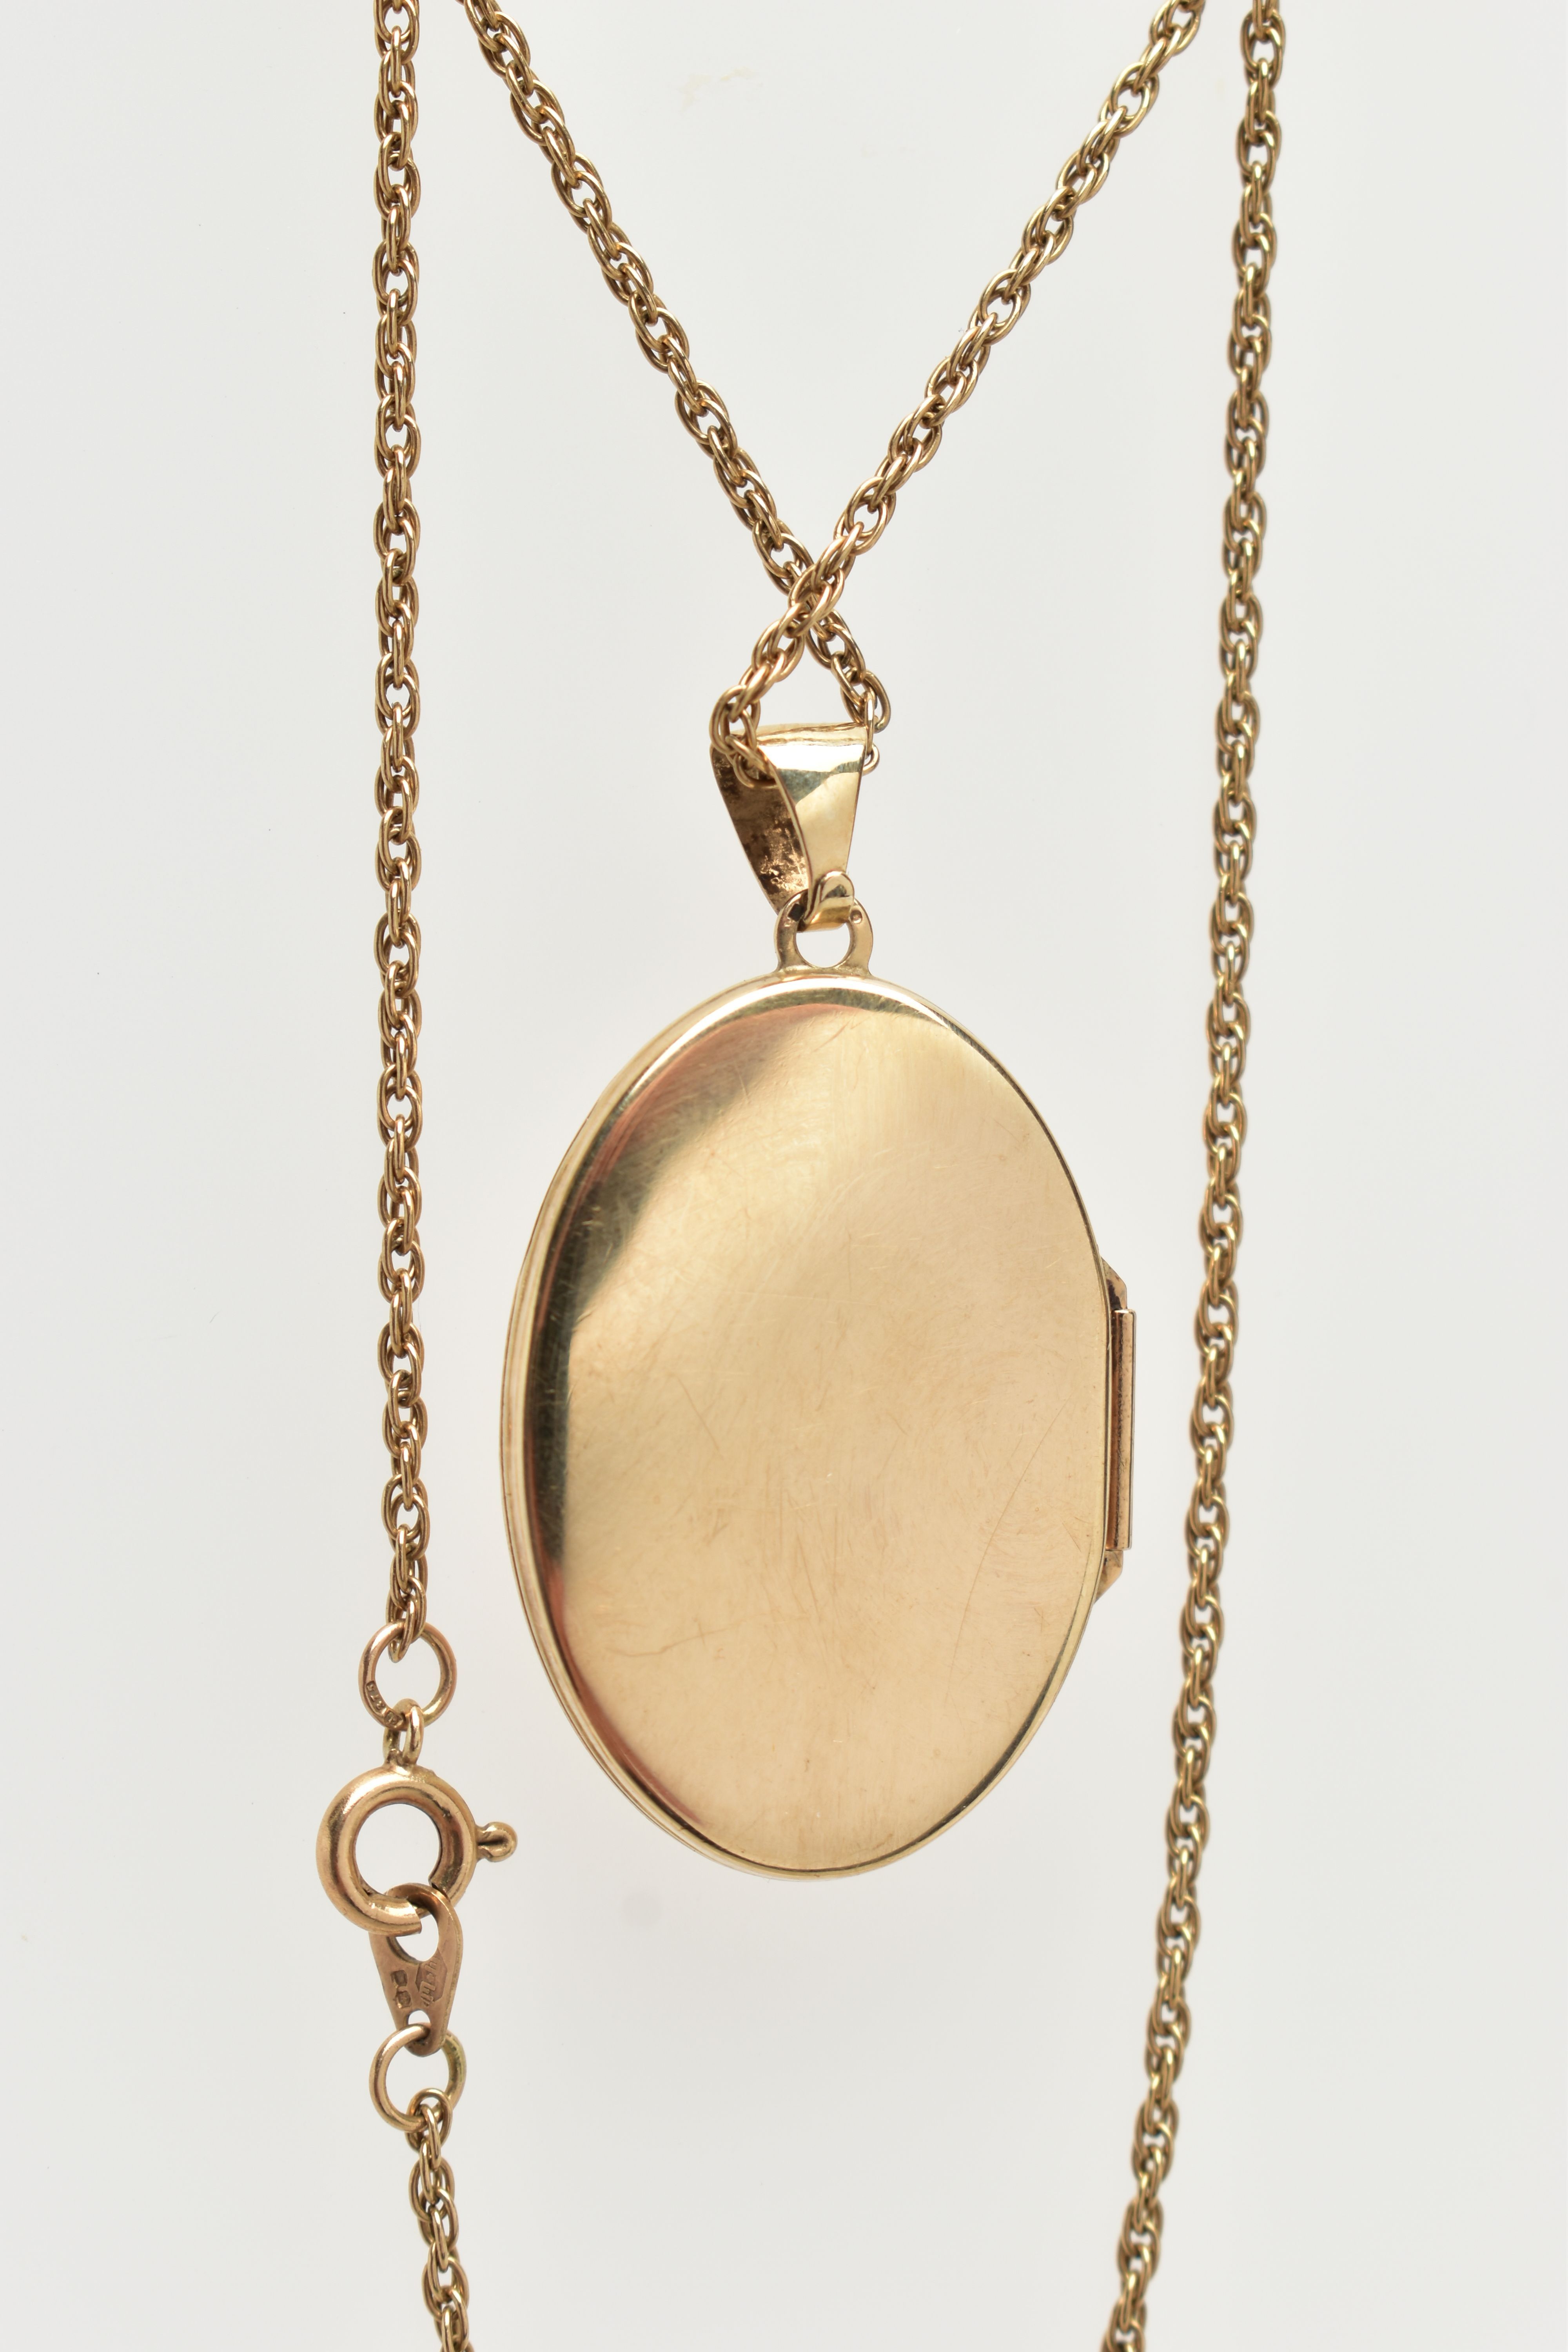 A 9CT GOLD LOCKET AND CHAIN, the locket of an oval form, decorated with a foliate pattern and vacant - Image 2 of 3